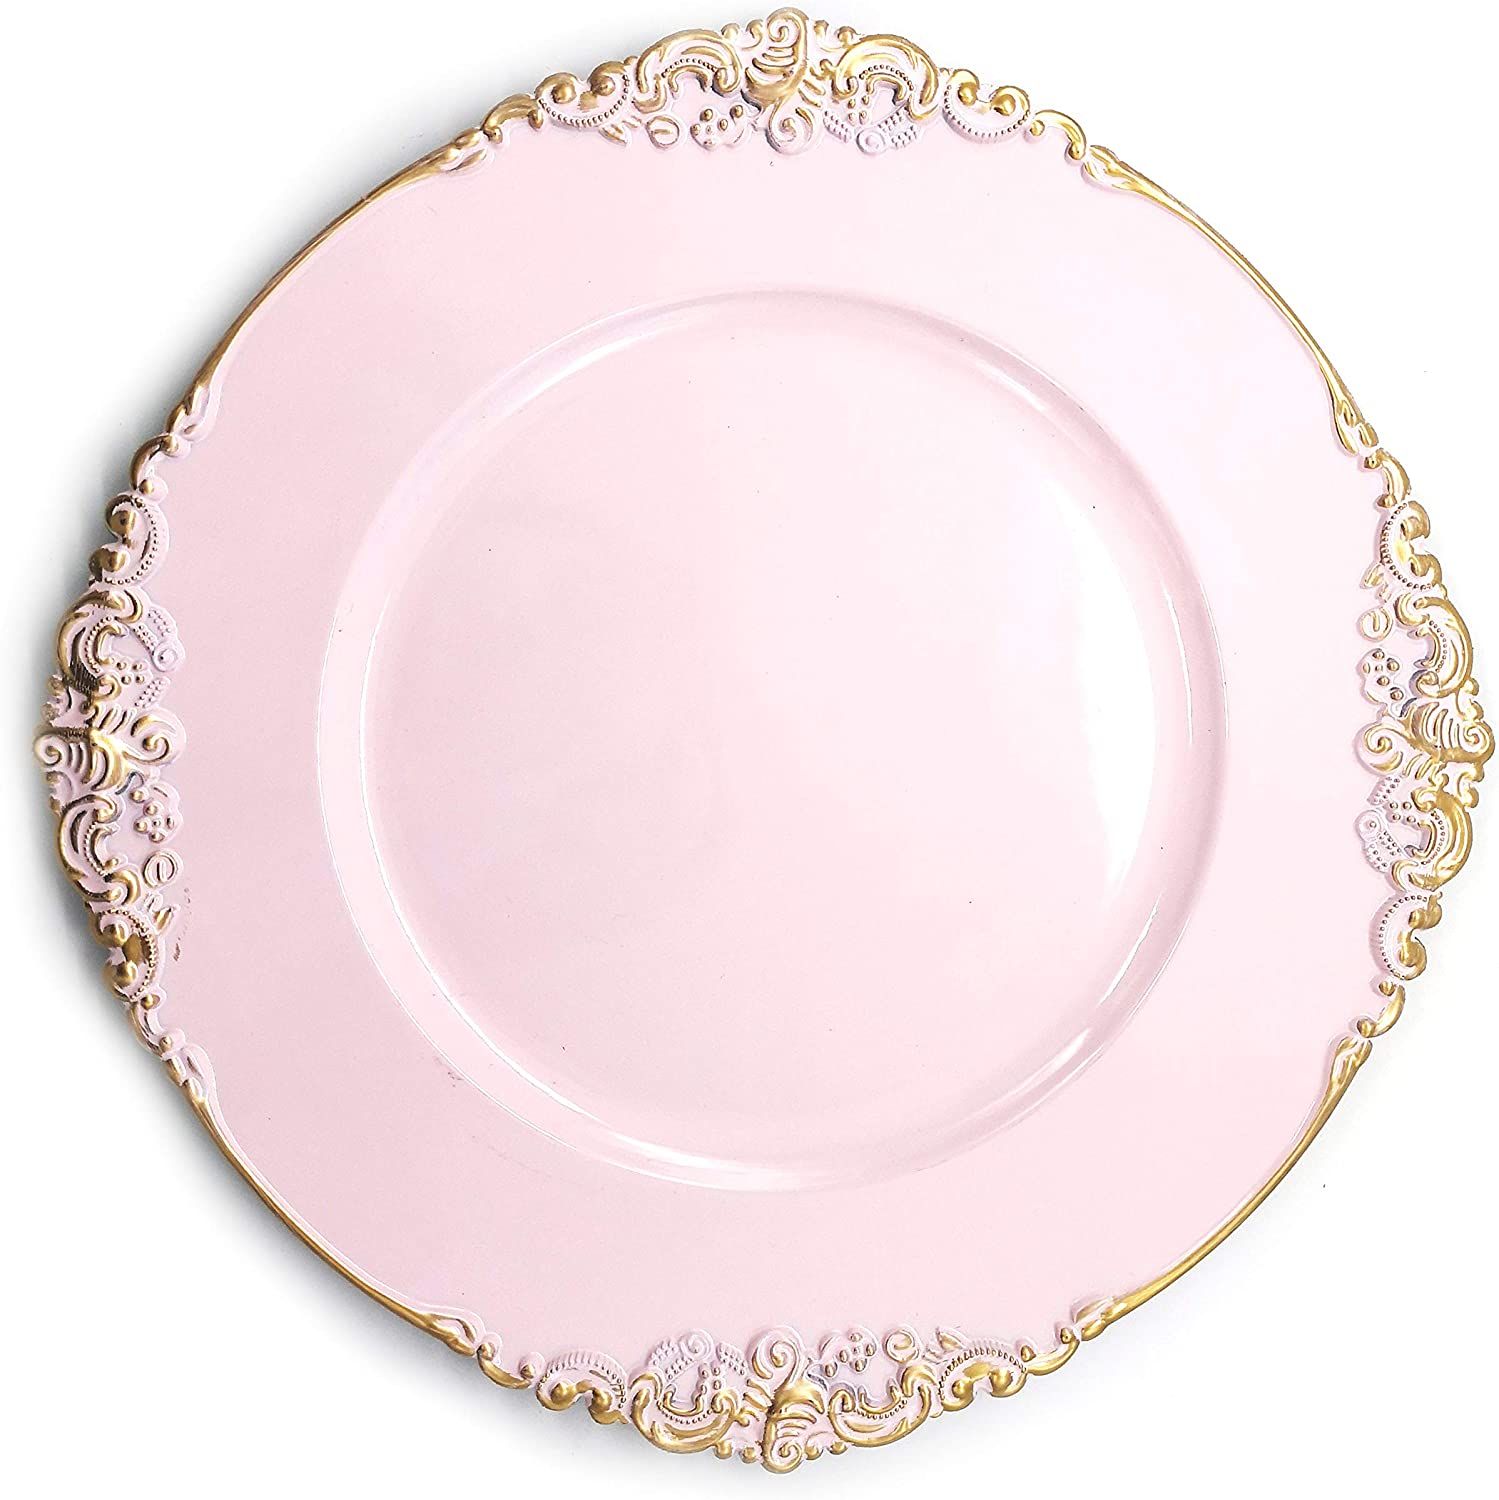 Allgala 13-Inch 6-Pack Heavy Quality Round Charger Plates-Floral Pink-HD80345 | Amazon (US)